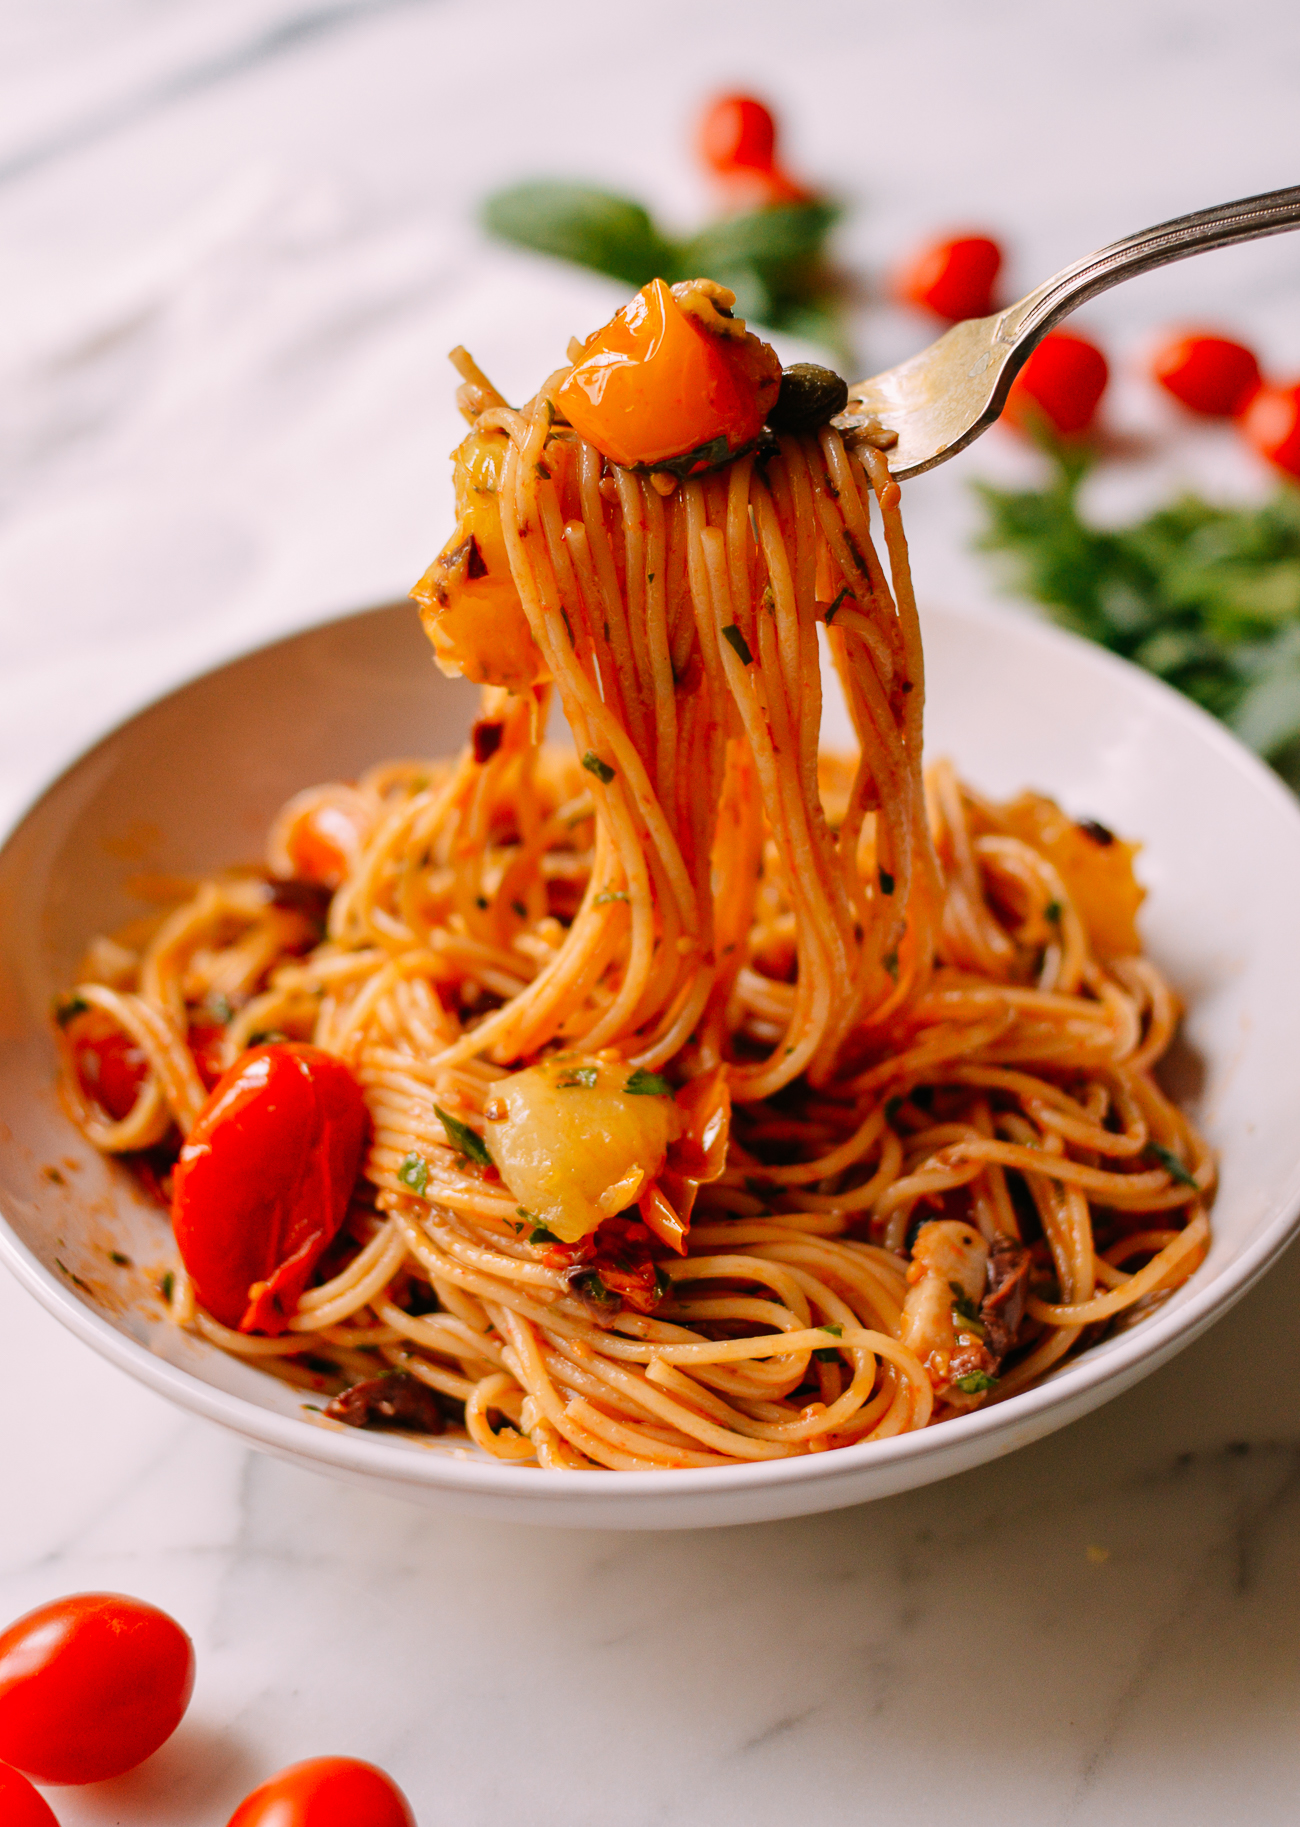 Forkful of Spaghetti with Roasted Cherry Tomato Puttanesca Sauce